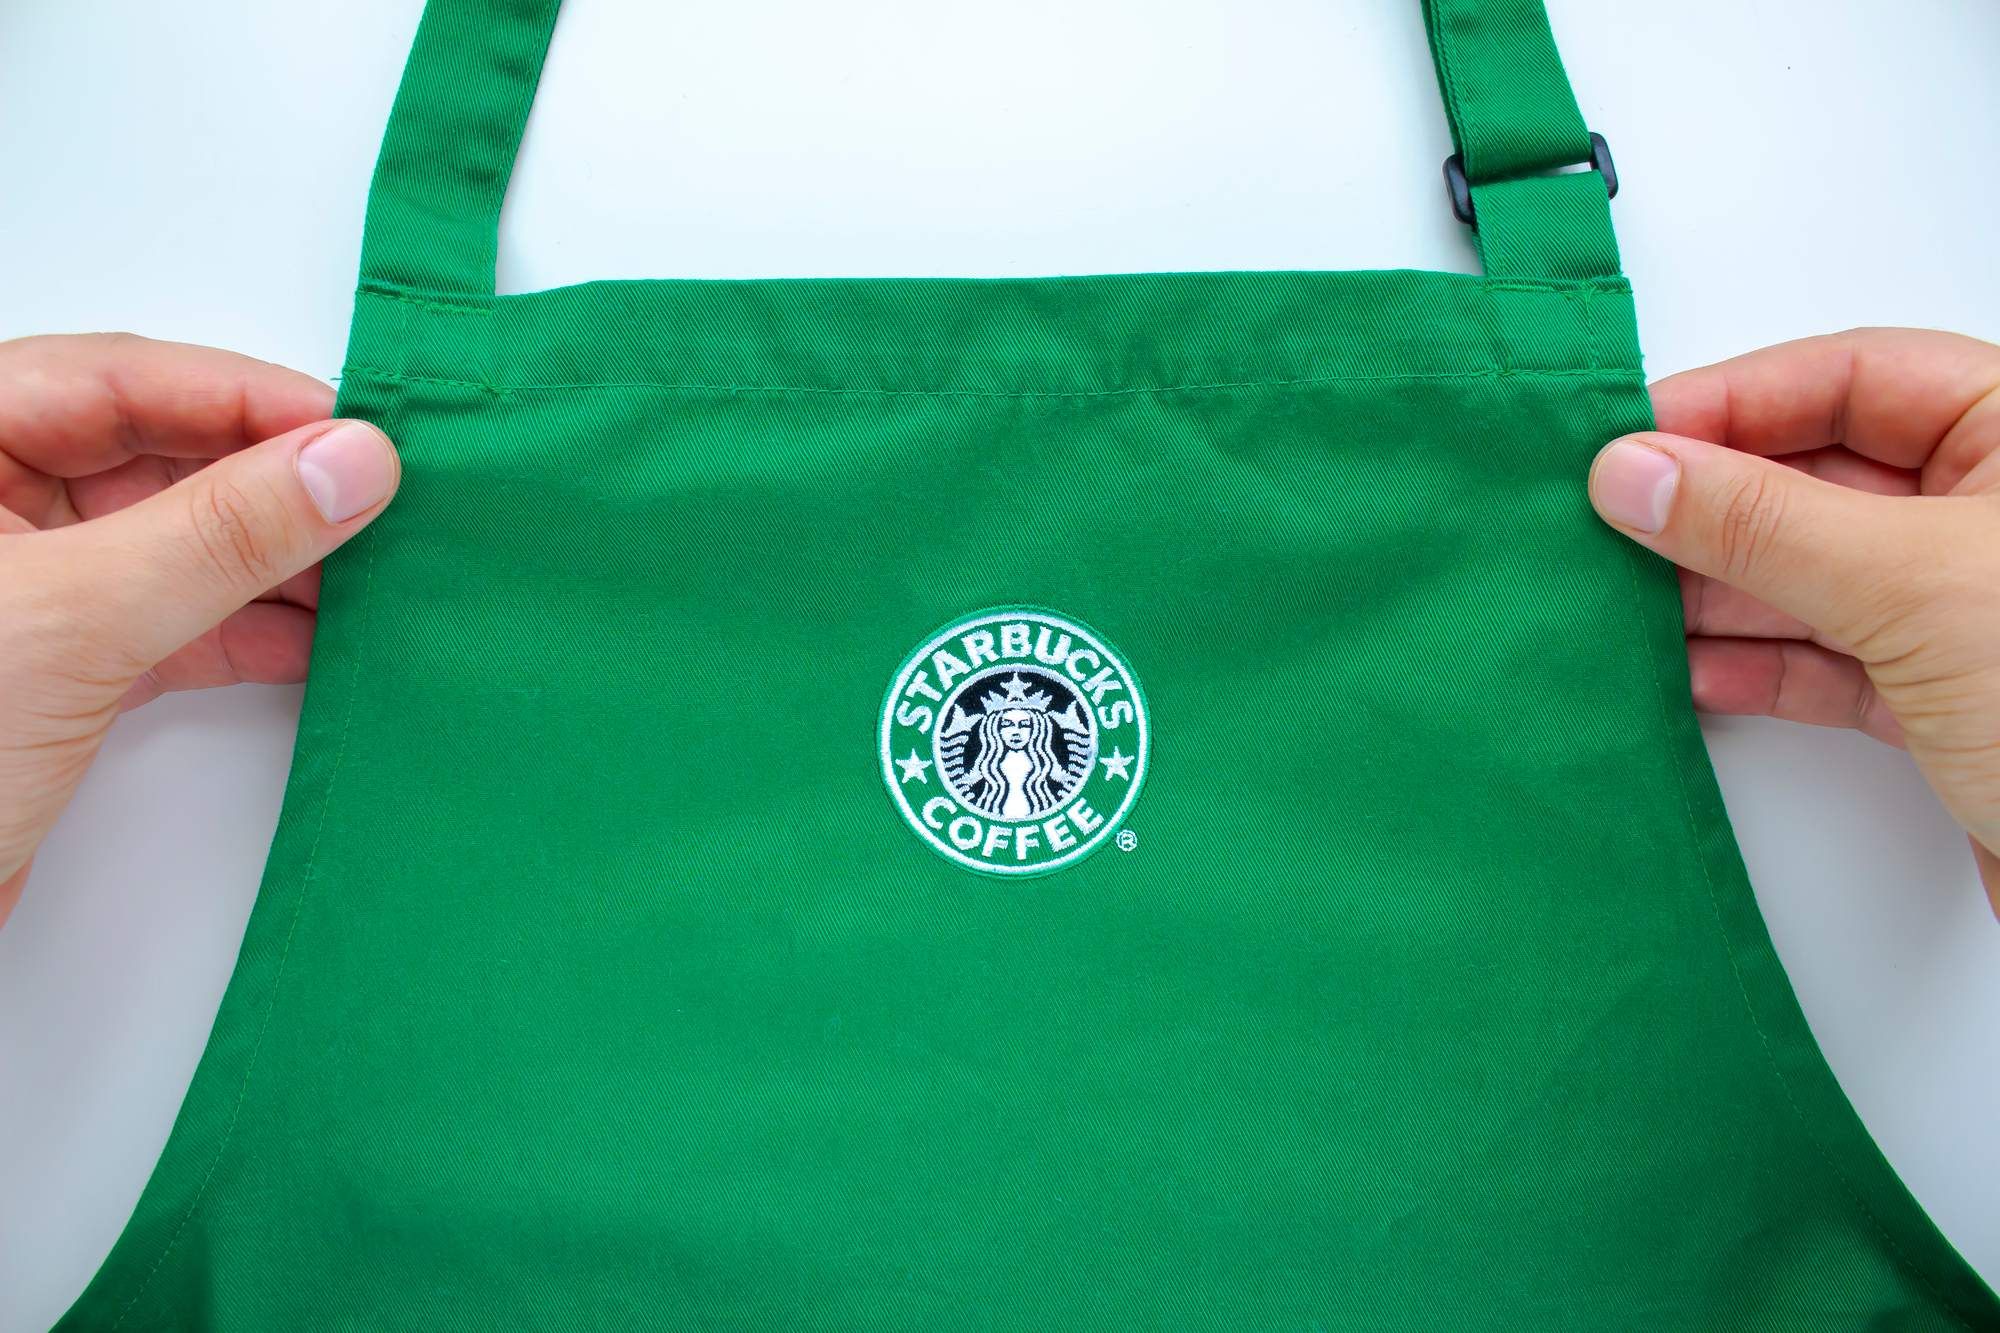 Starbucks apron regarding the Starbucks manager misclassification class action lawsuit filed 